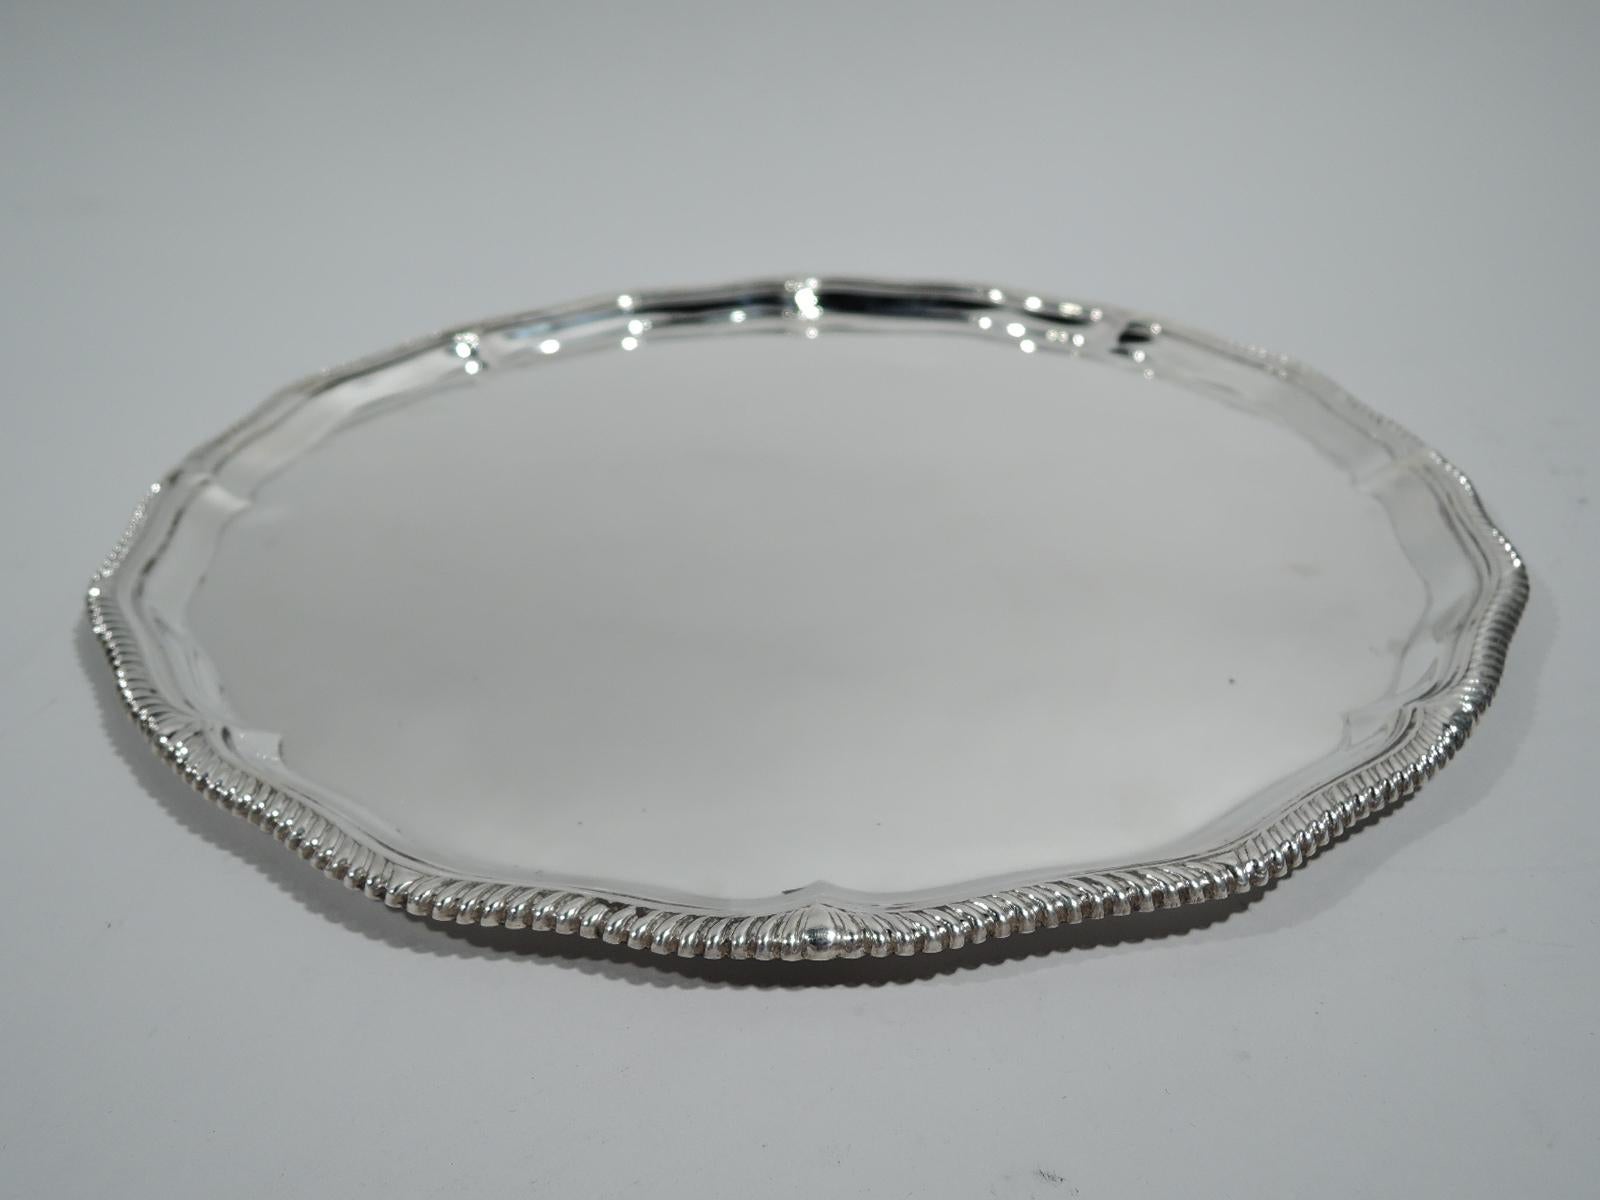 Elizabeth II sterling silver tray. Made by Adie Brothers in Birmingham in 1961. Round with gently scrolled and gadrooned rim. Traditional neoclassical style. Plenty of room for engraved presentation. Fully marked. Weight: 24 troy ounces.